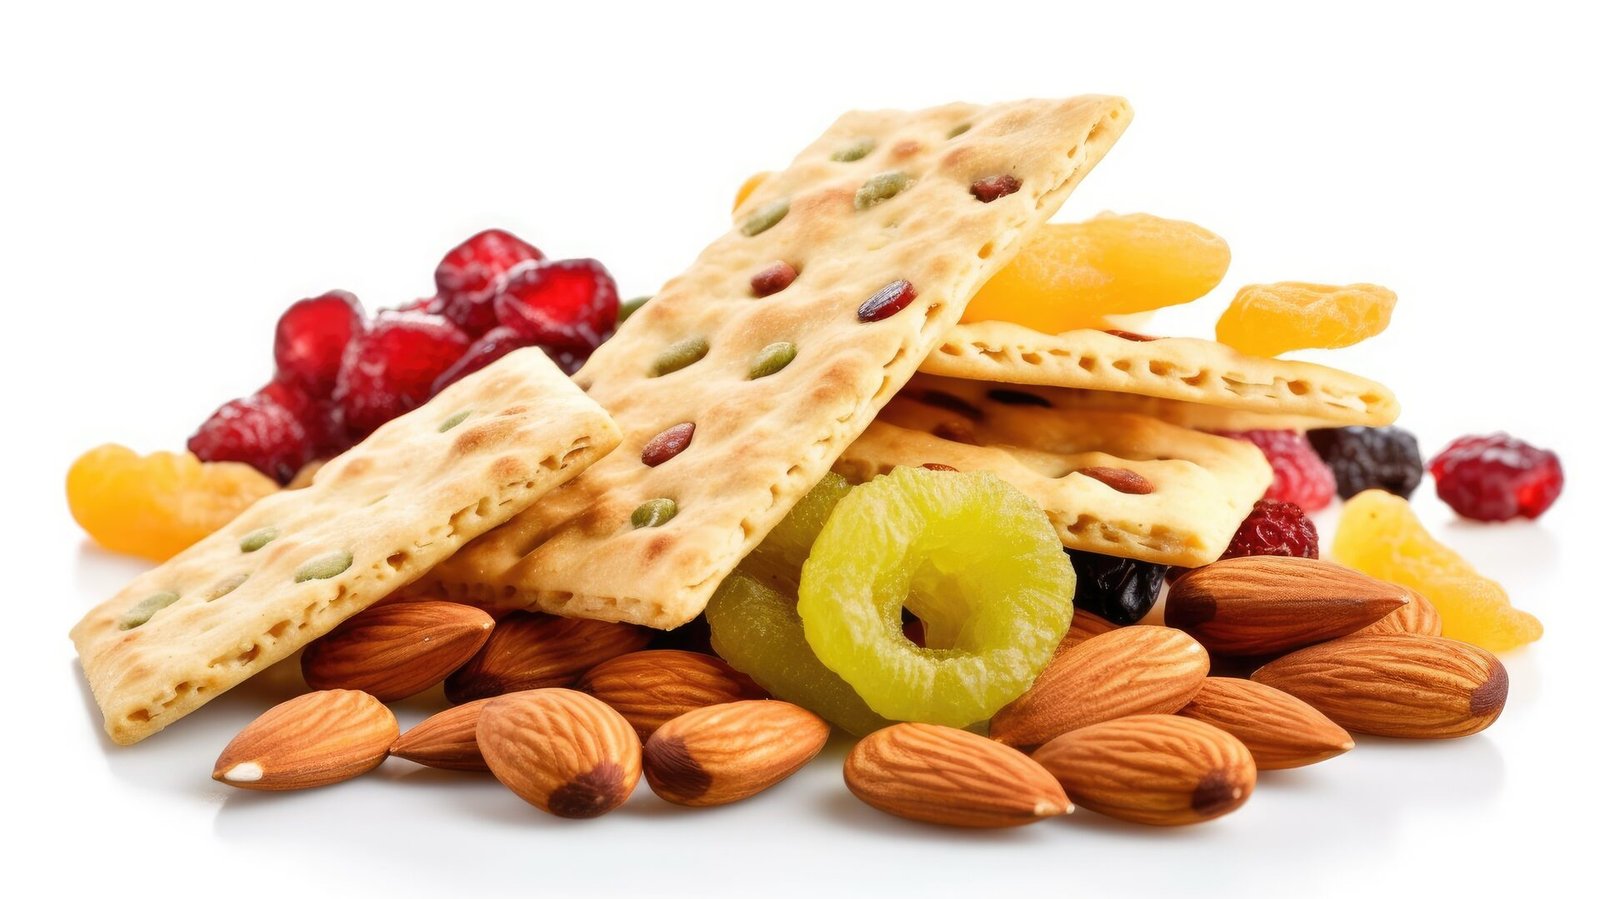 A pile of crackers and fruit on a white background.